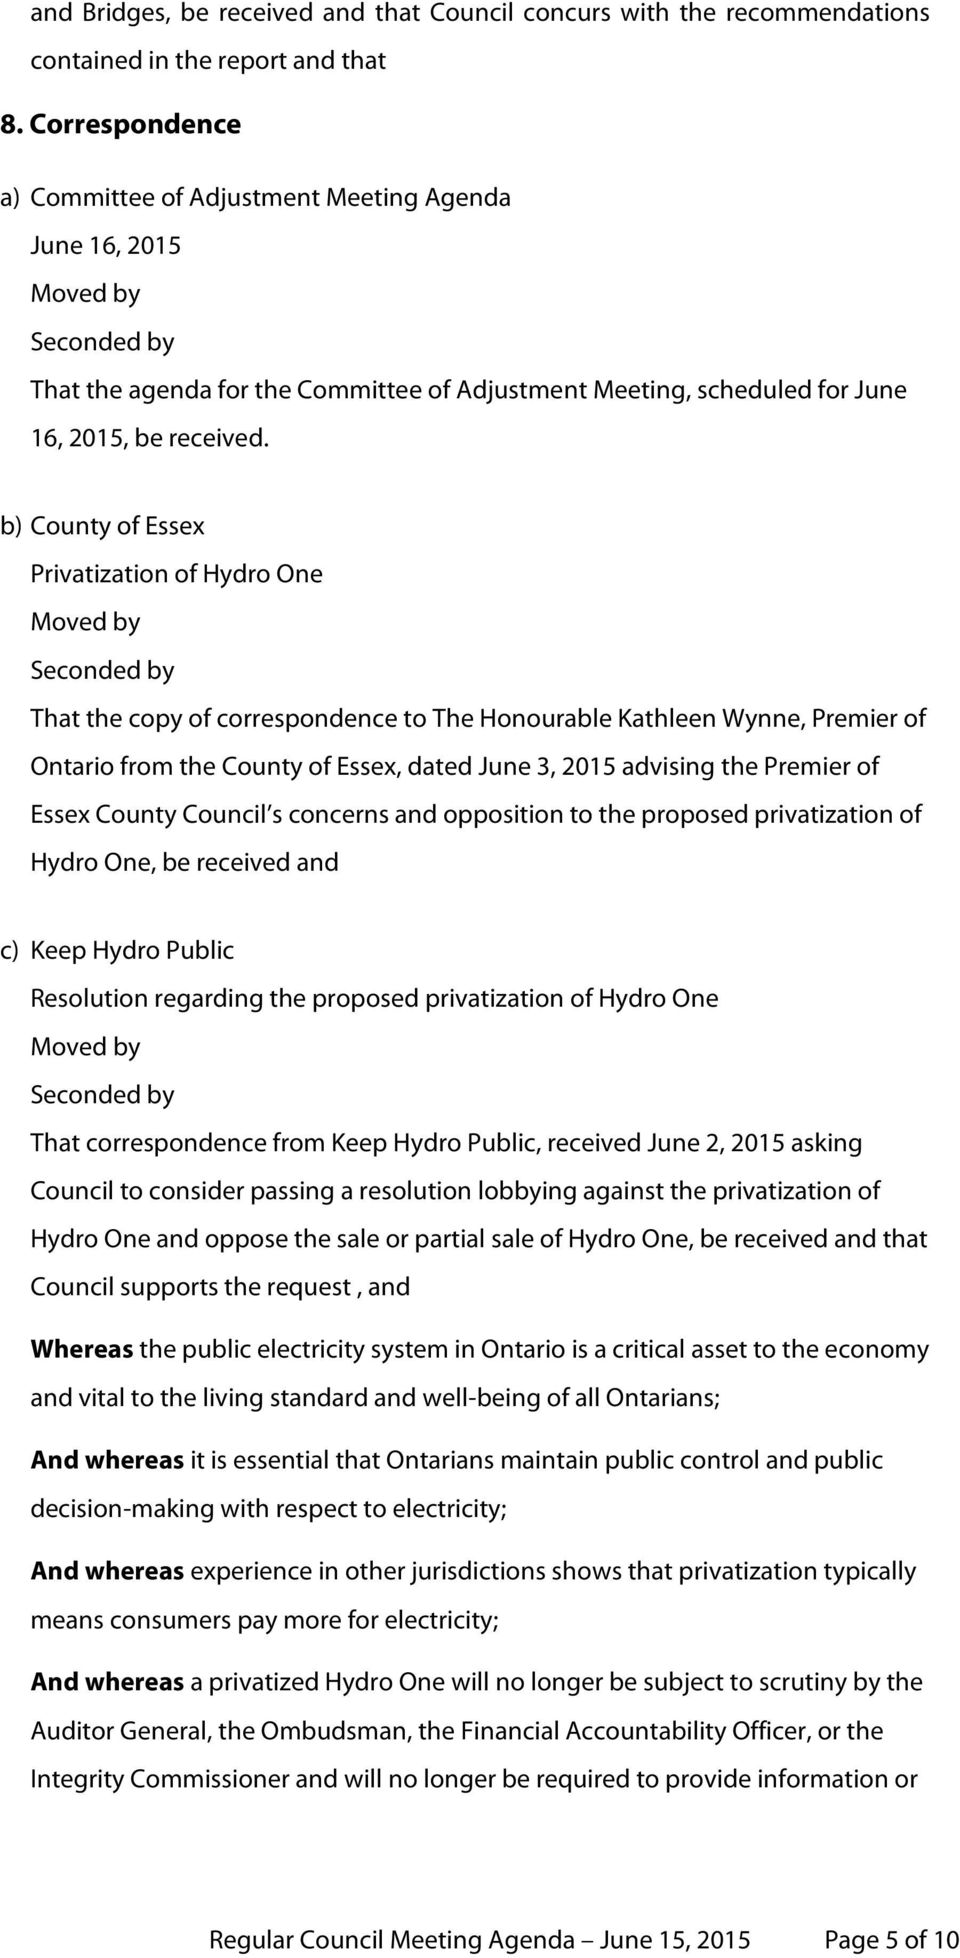 b) County of Essex Privatization of Hydro One That the copy of correspondence to The Honourable Kathleen Wynne, Premier of Ontario from the County of Essex, dated June 3, 2015 advising the Premier of